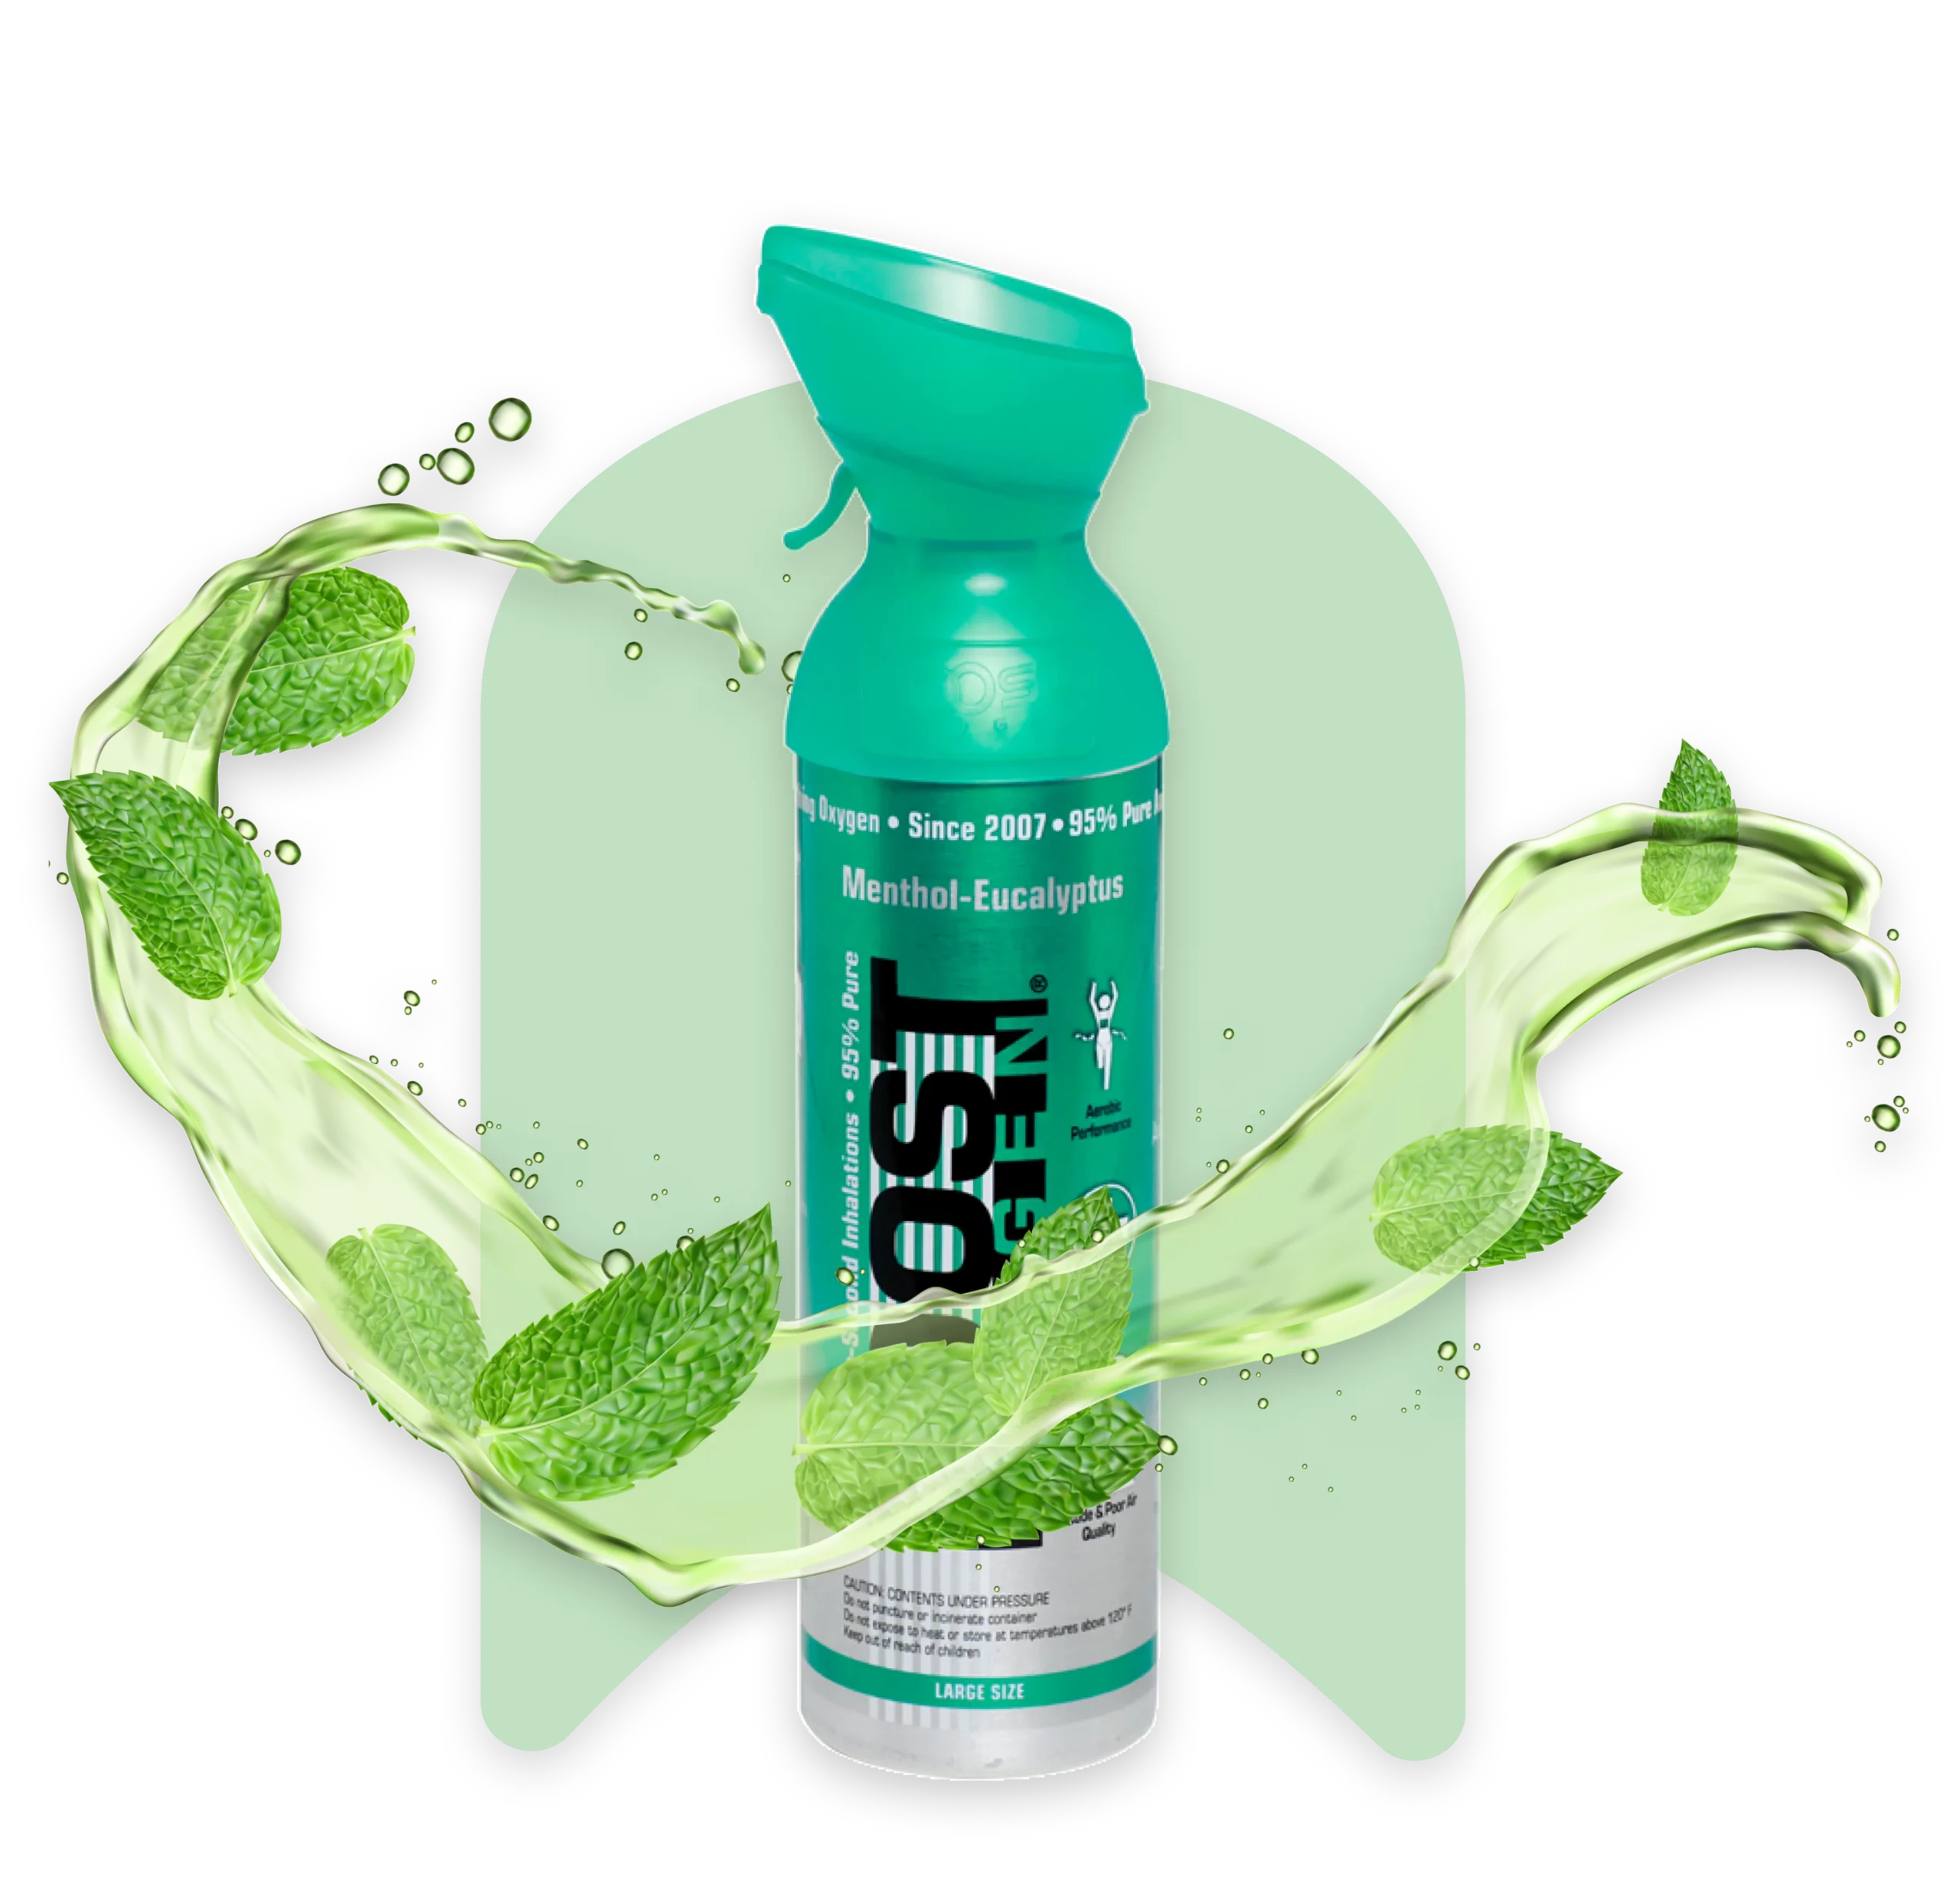 Boost Oxygen Europe 95% Pure Oxygen canisters